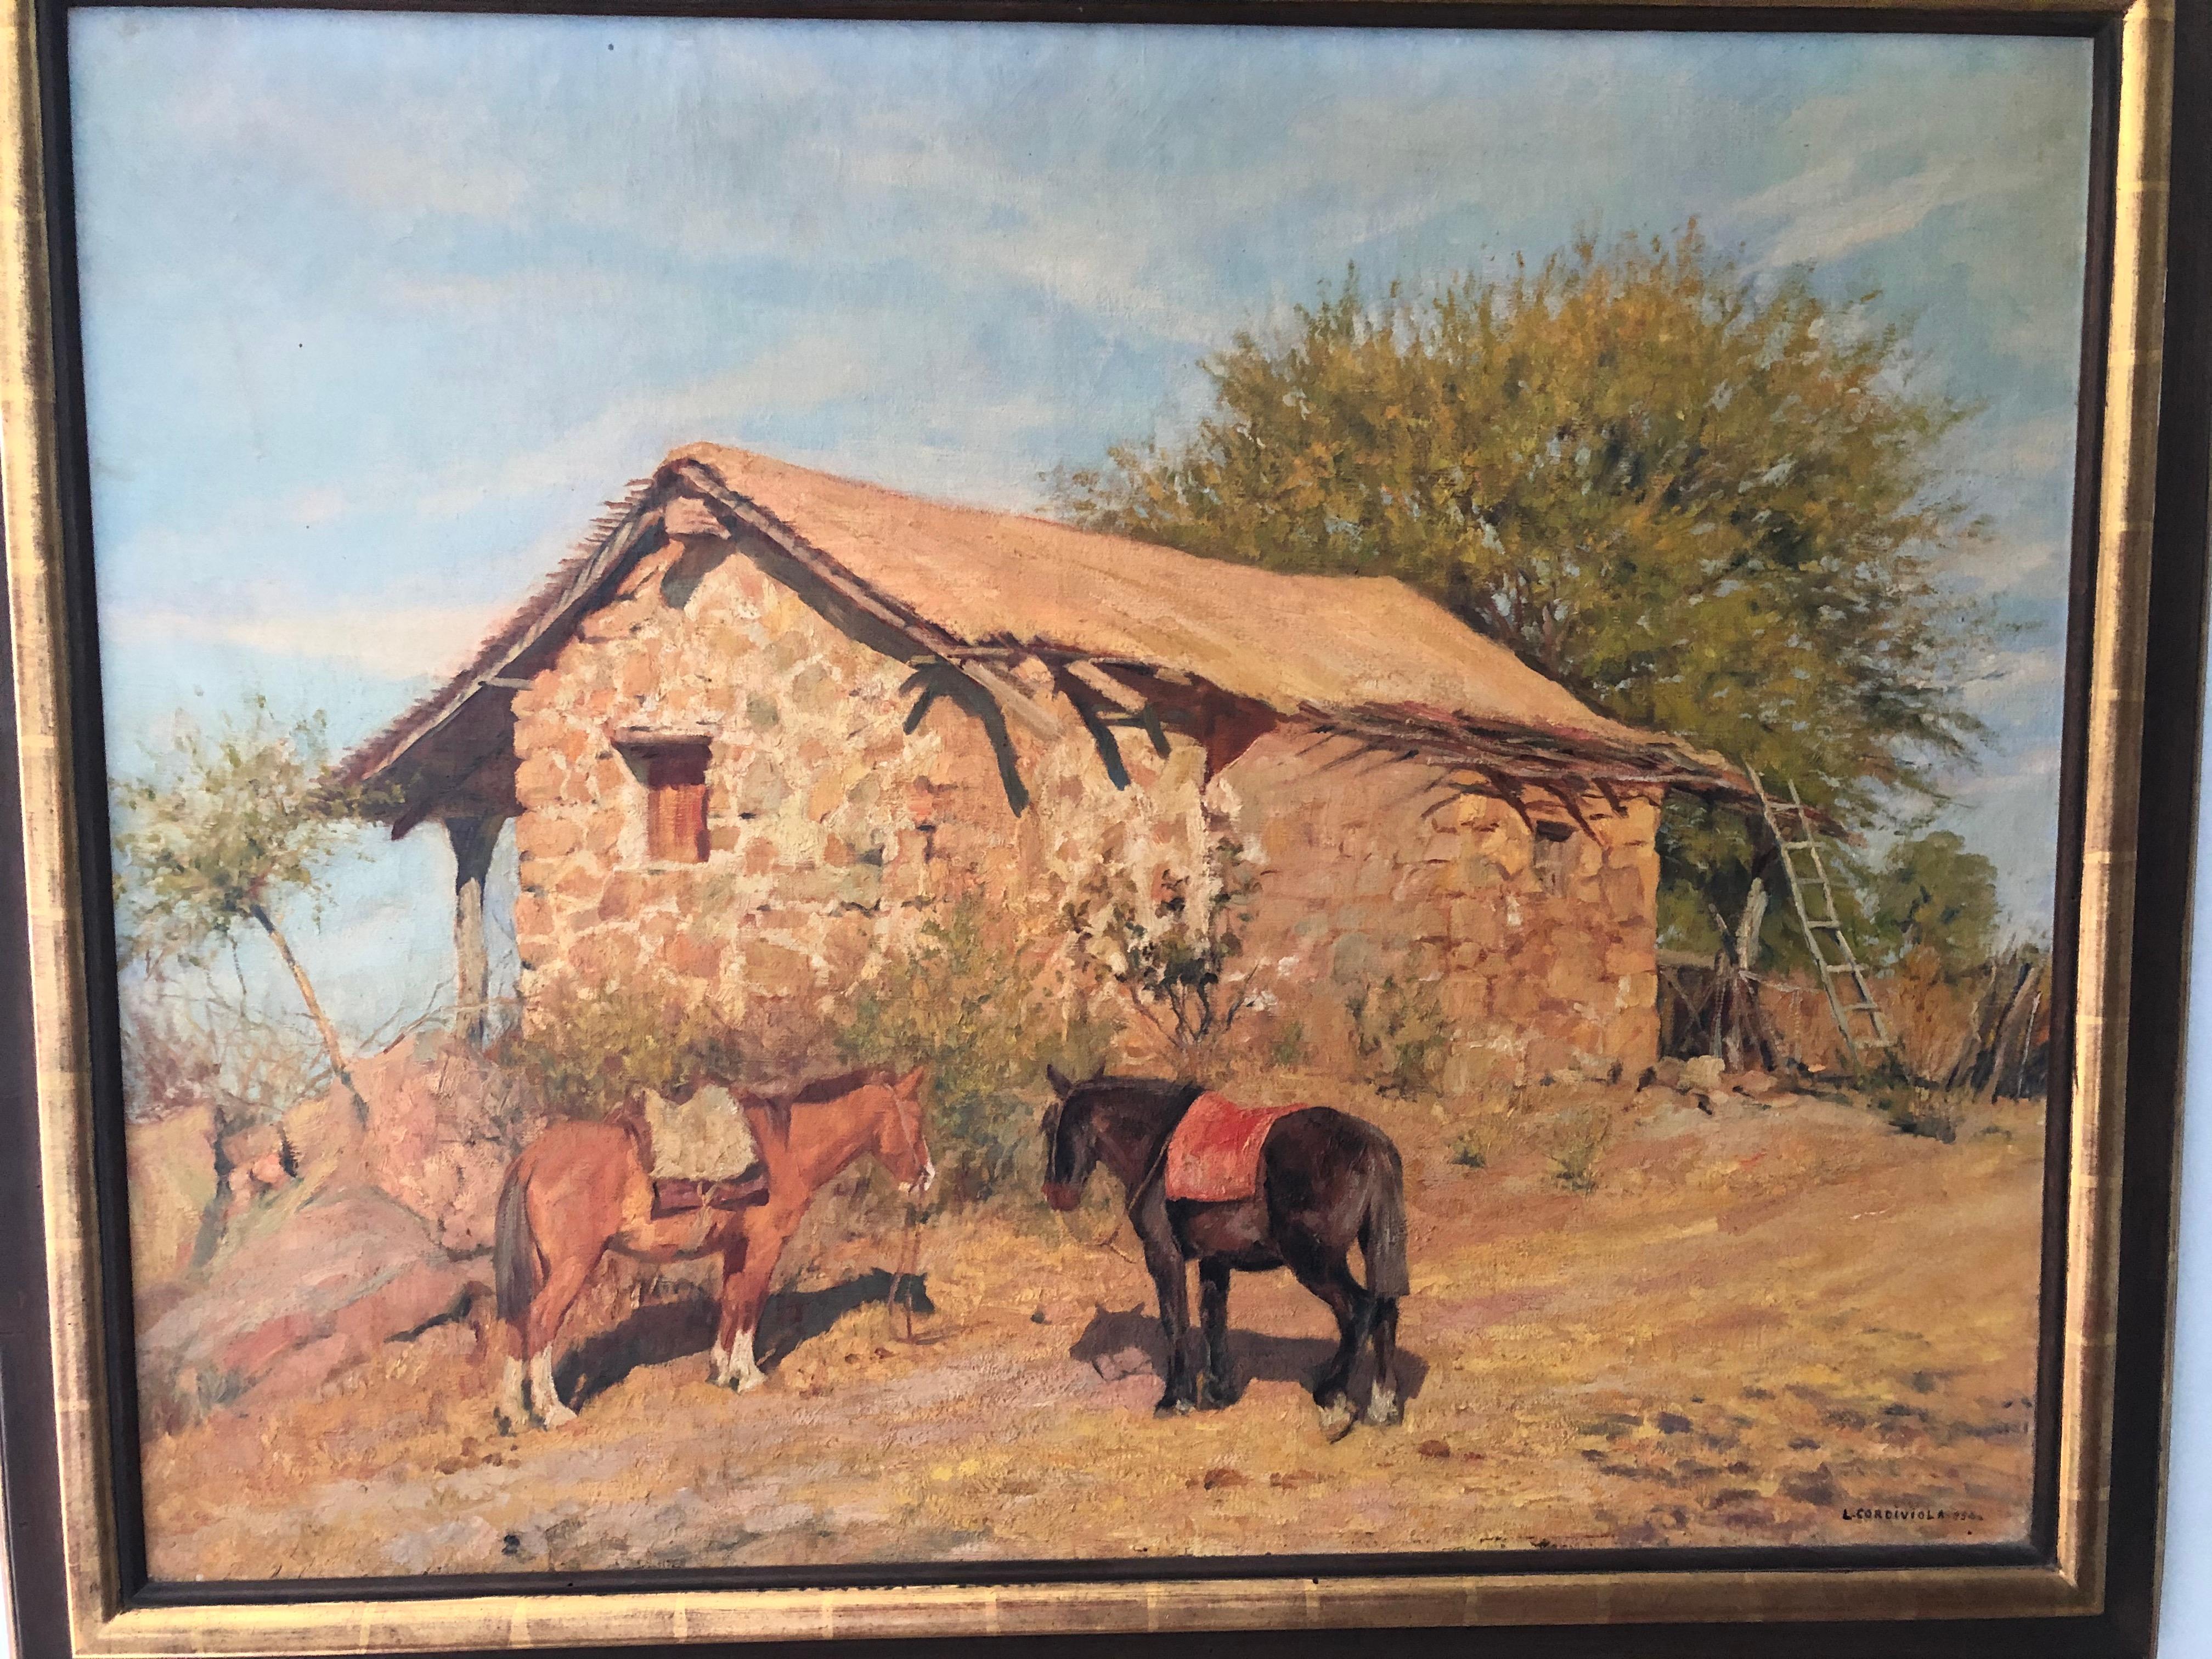 Luis Cordiviola: 1892-1967. Well listed painter from Argentina. He has had auction results over $10,000. This wonderful example of his work is an oil on canvas measuring 38 inches wide by 30 high. The frame measures 43 1/8 inches wide by 35 1/4